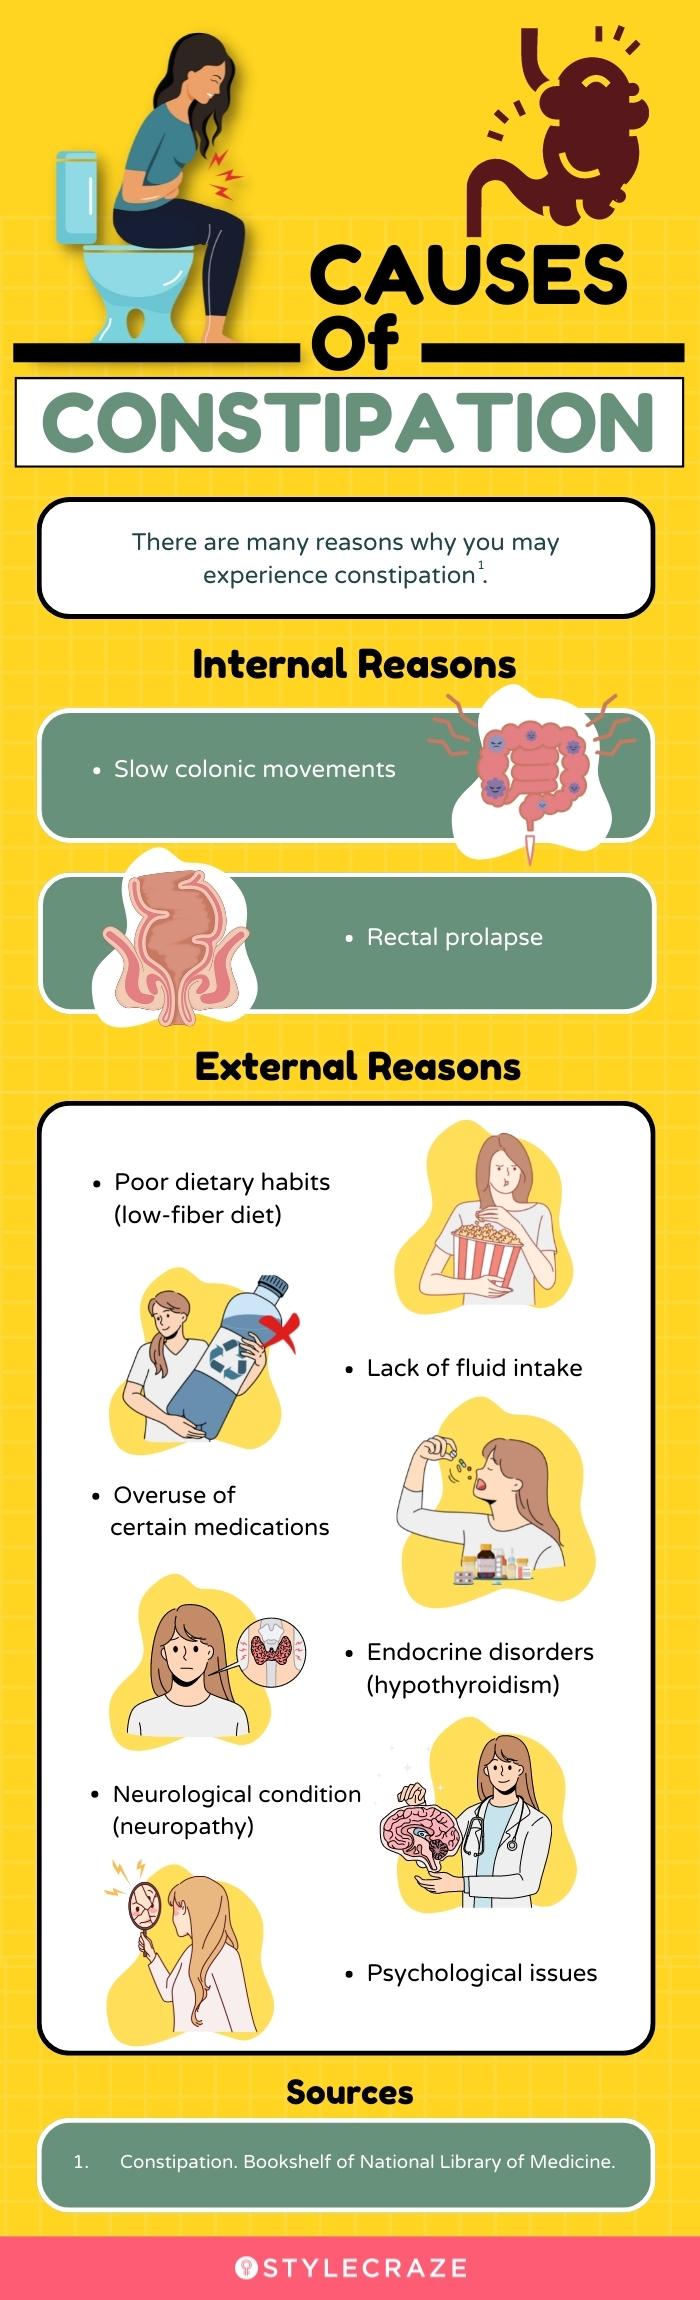 causes of constipation (infographic)